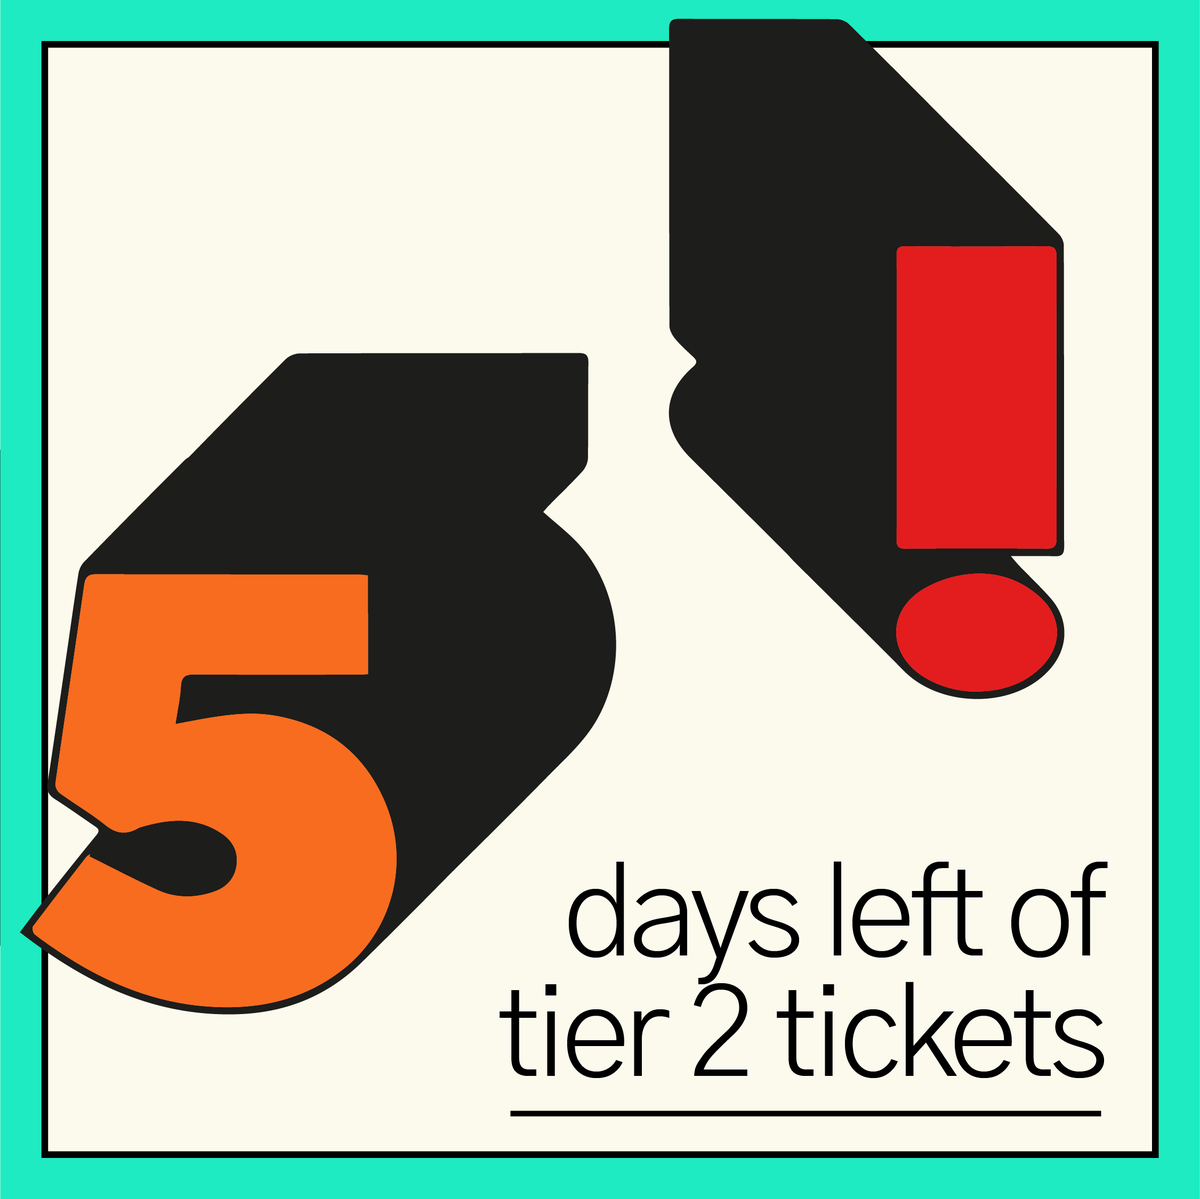 It's a simple race-against-the-clock task today: 5 days to save £5. Leave the mate who's a 'maybe' behind: festival prep does not favour the fickle. soundsfromtheothercity.com/tickets 🎟